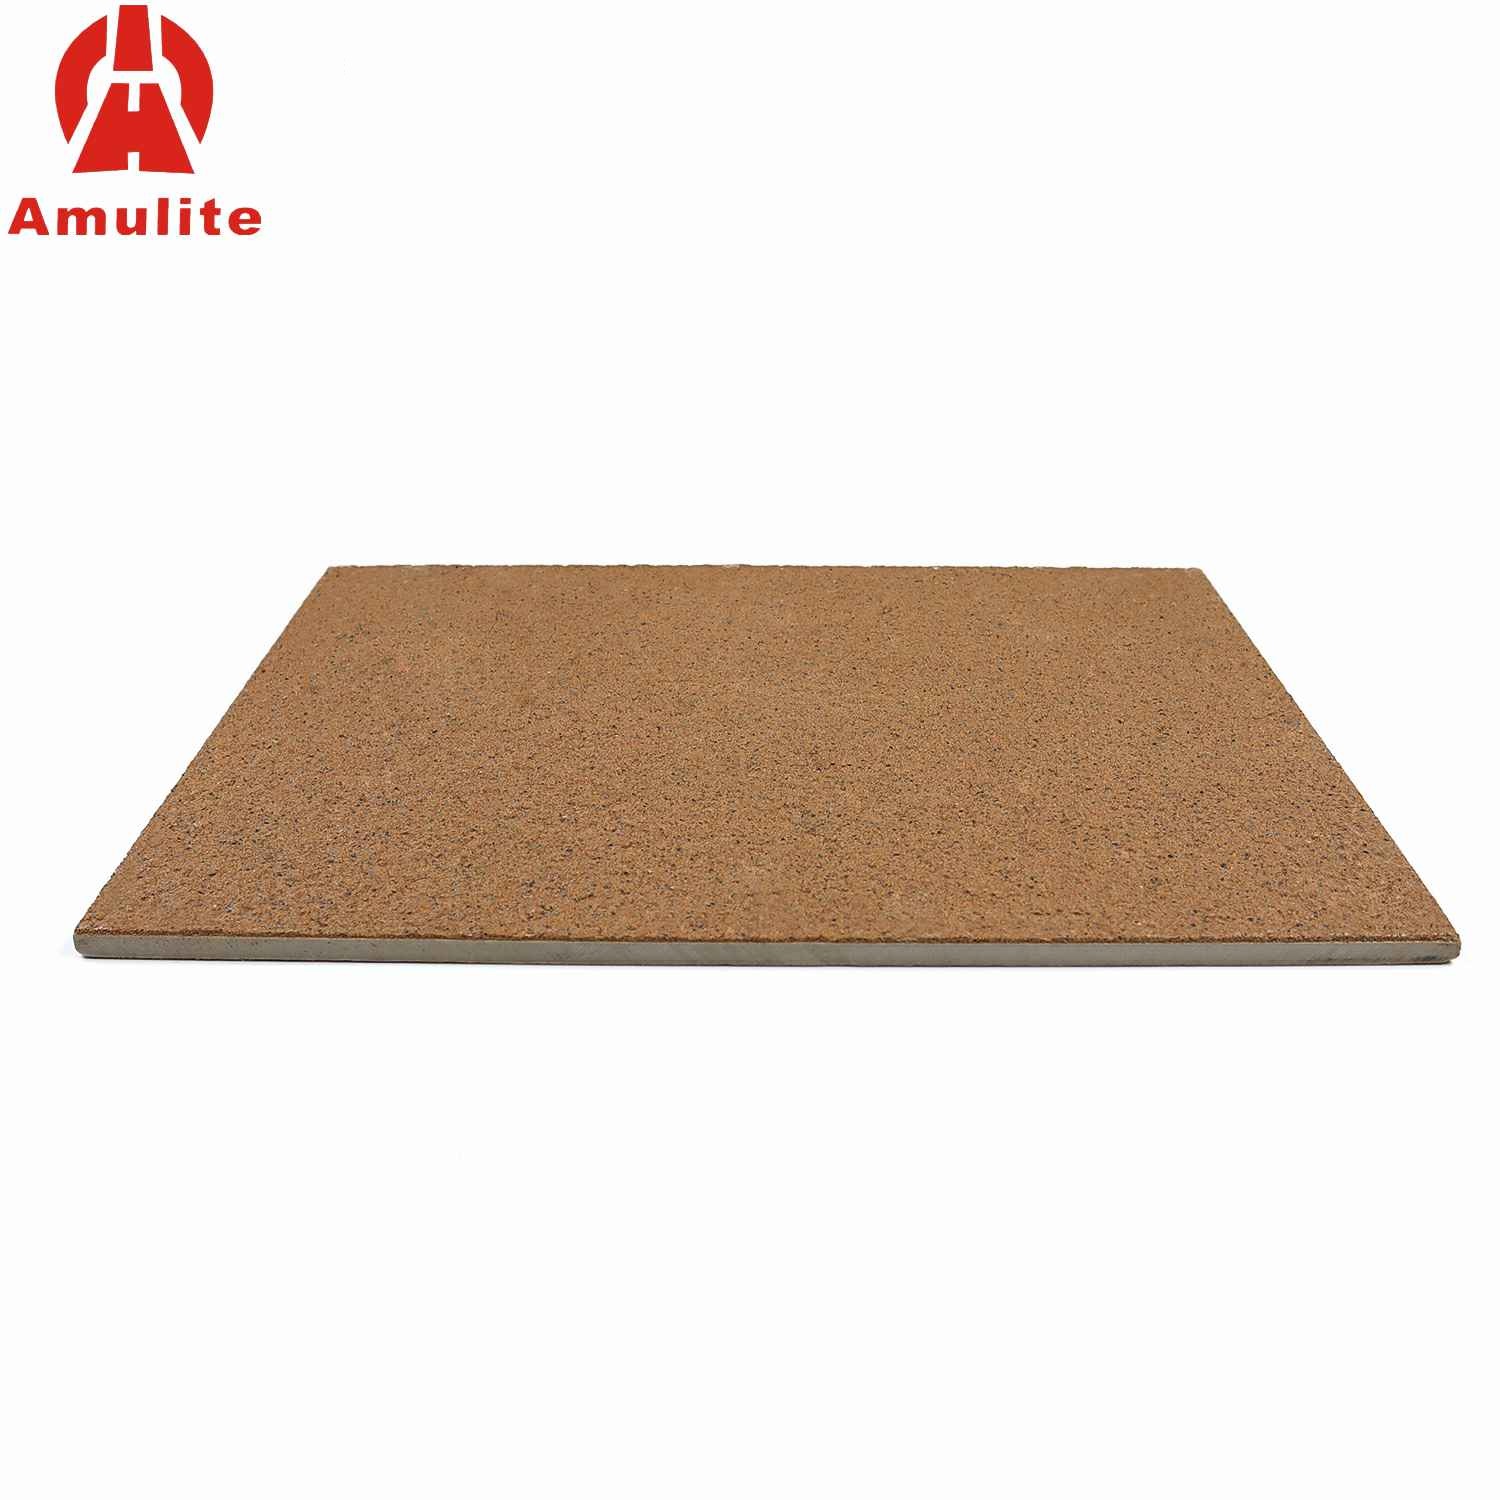 Real Stone Painting Fiber Cement Board (၃)၊